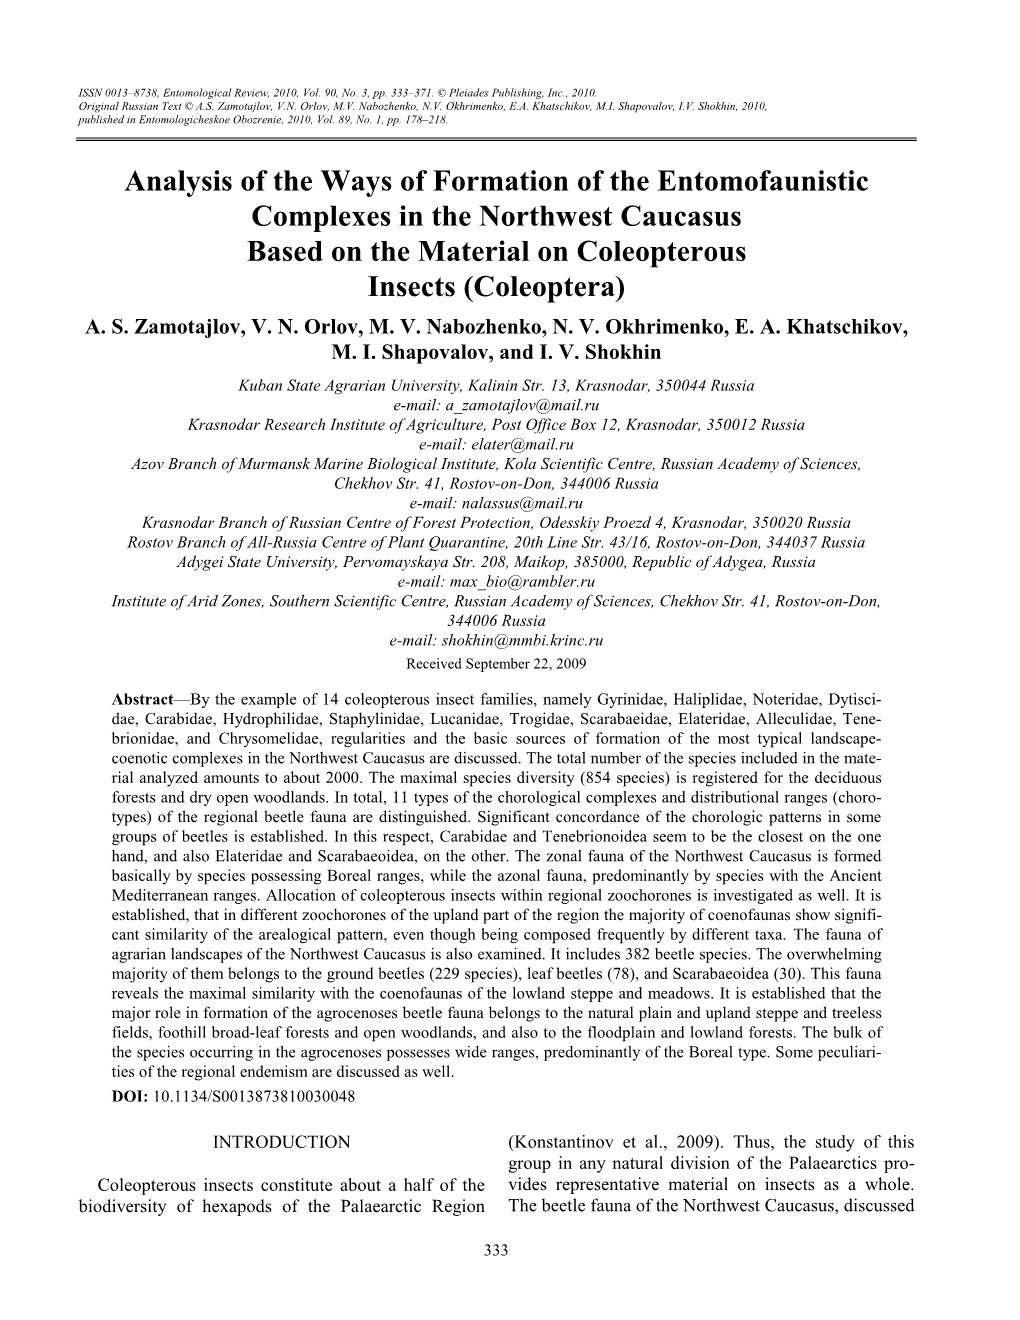 Analysis of the Ways of Formation of the Entomofaunistic Complexes in the Northwest Caucasus Based on the Material on Coleopterous Insects (Coleoptera) A